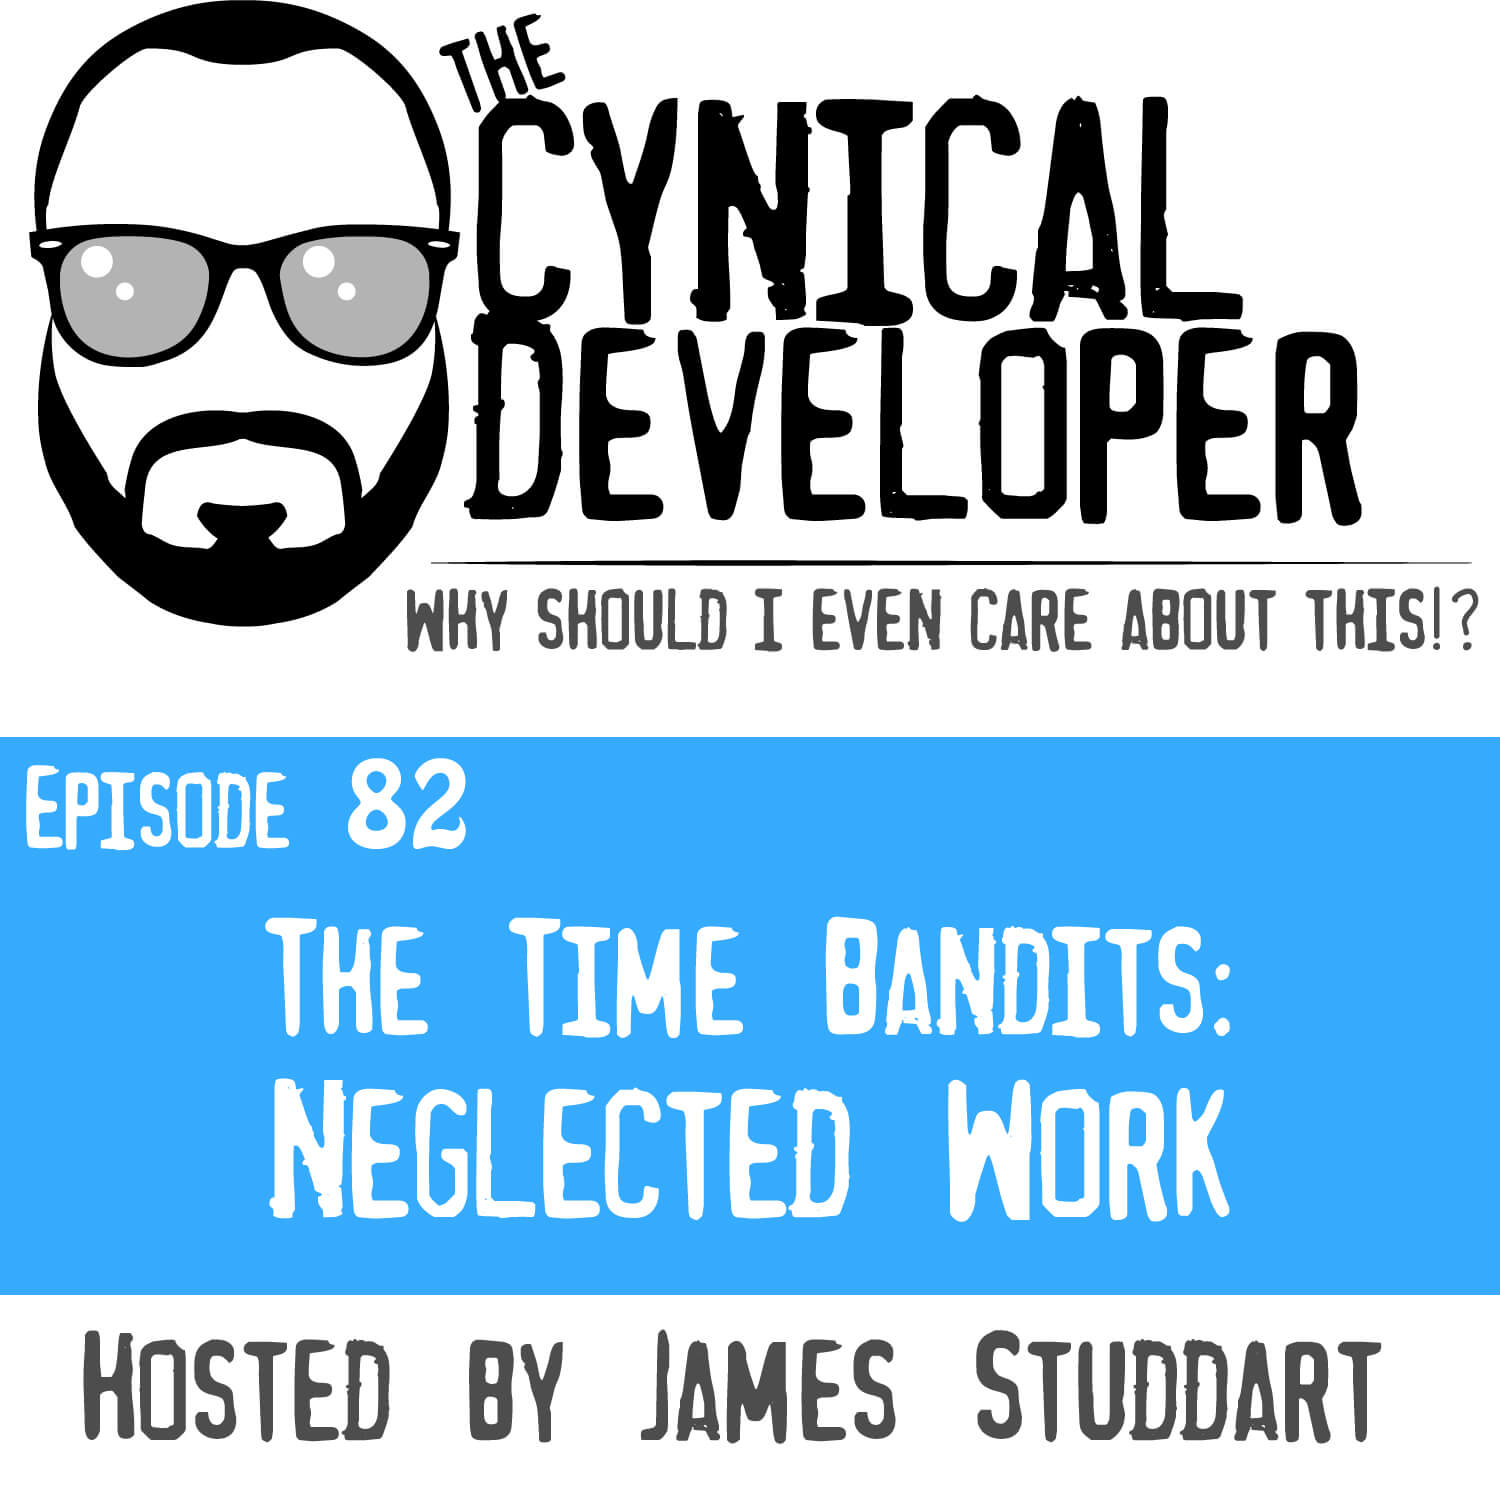 Episode 82 - Neglected Work